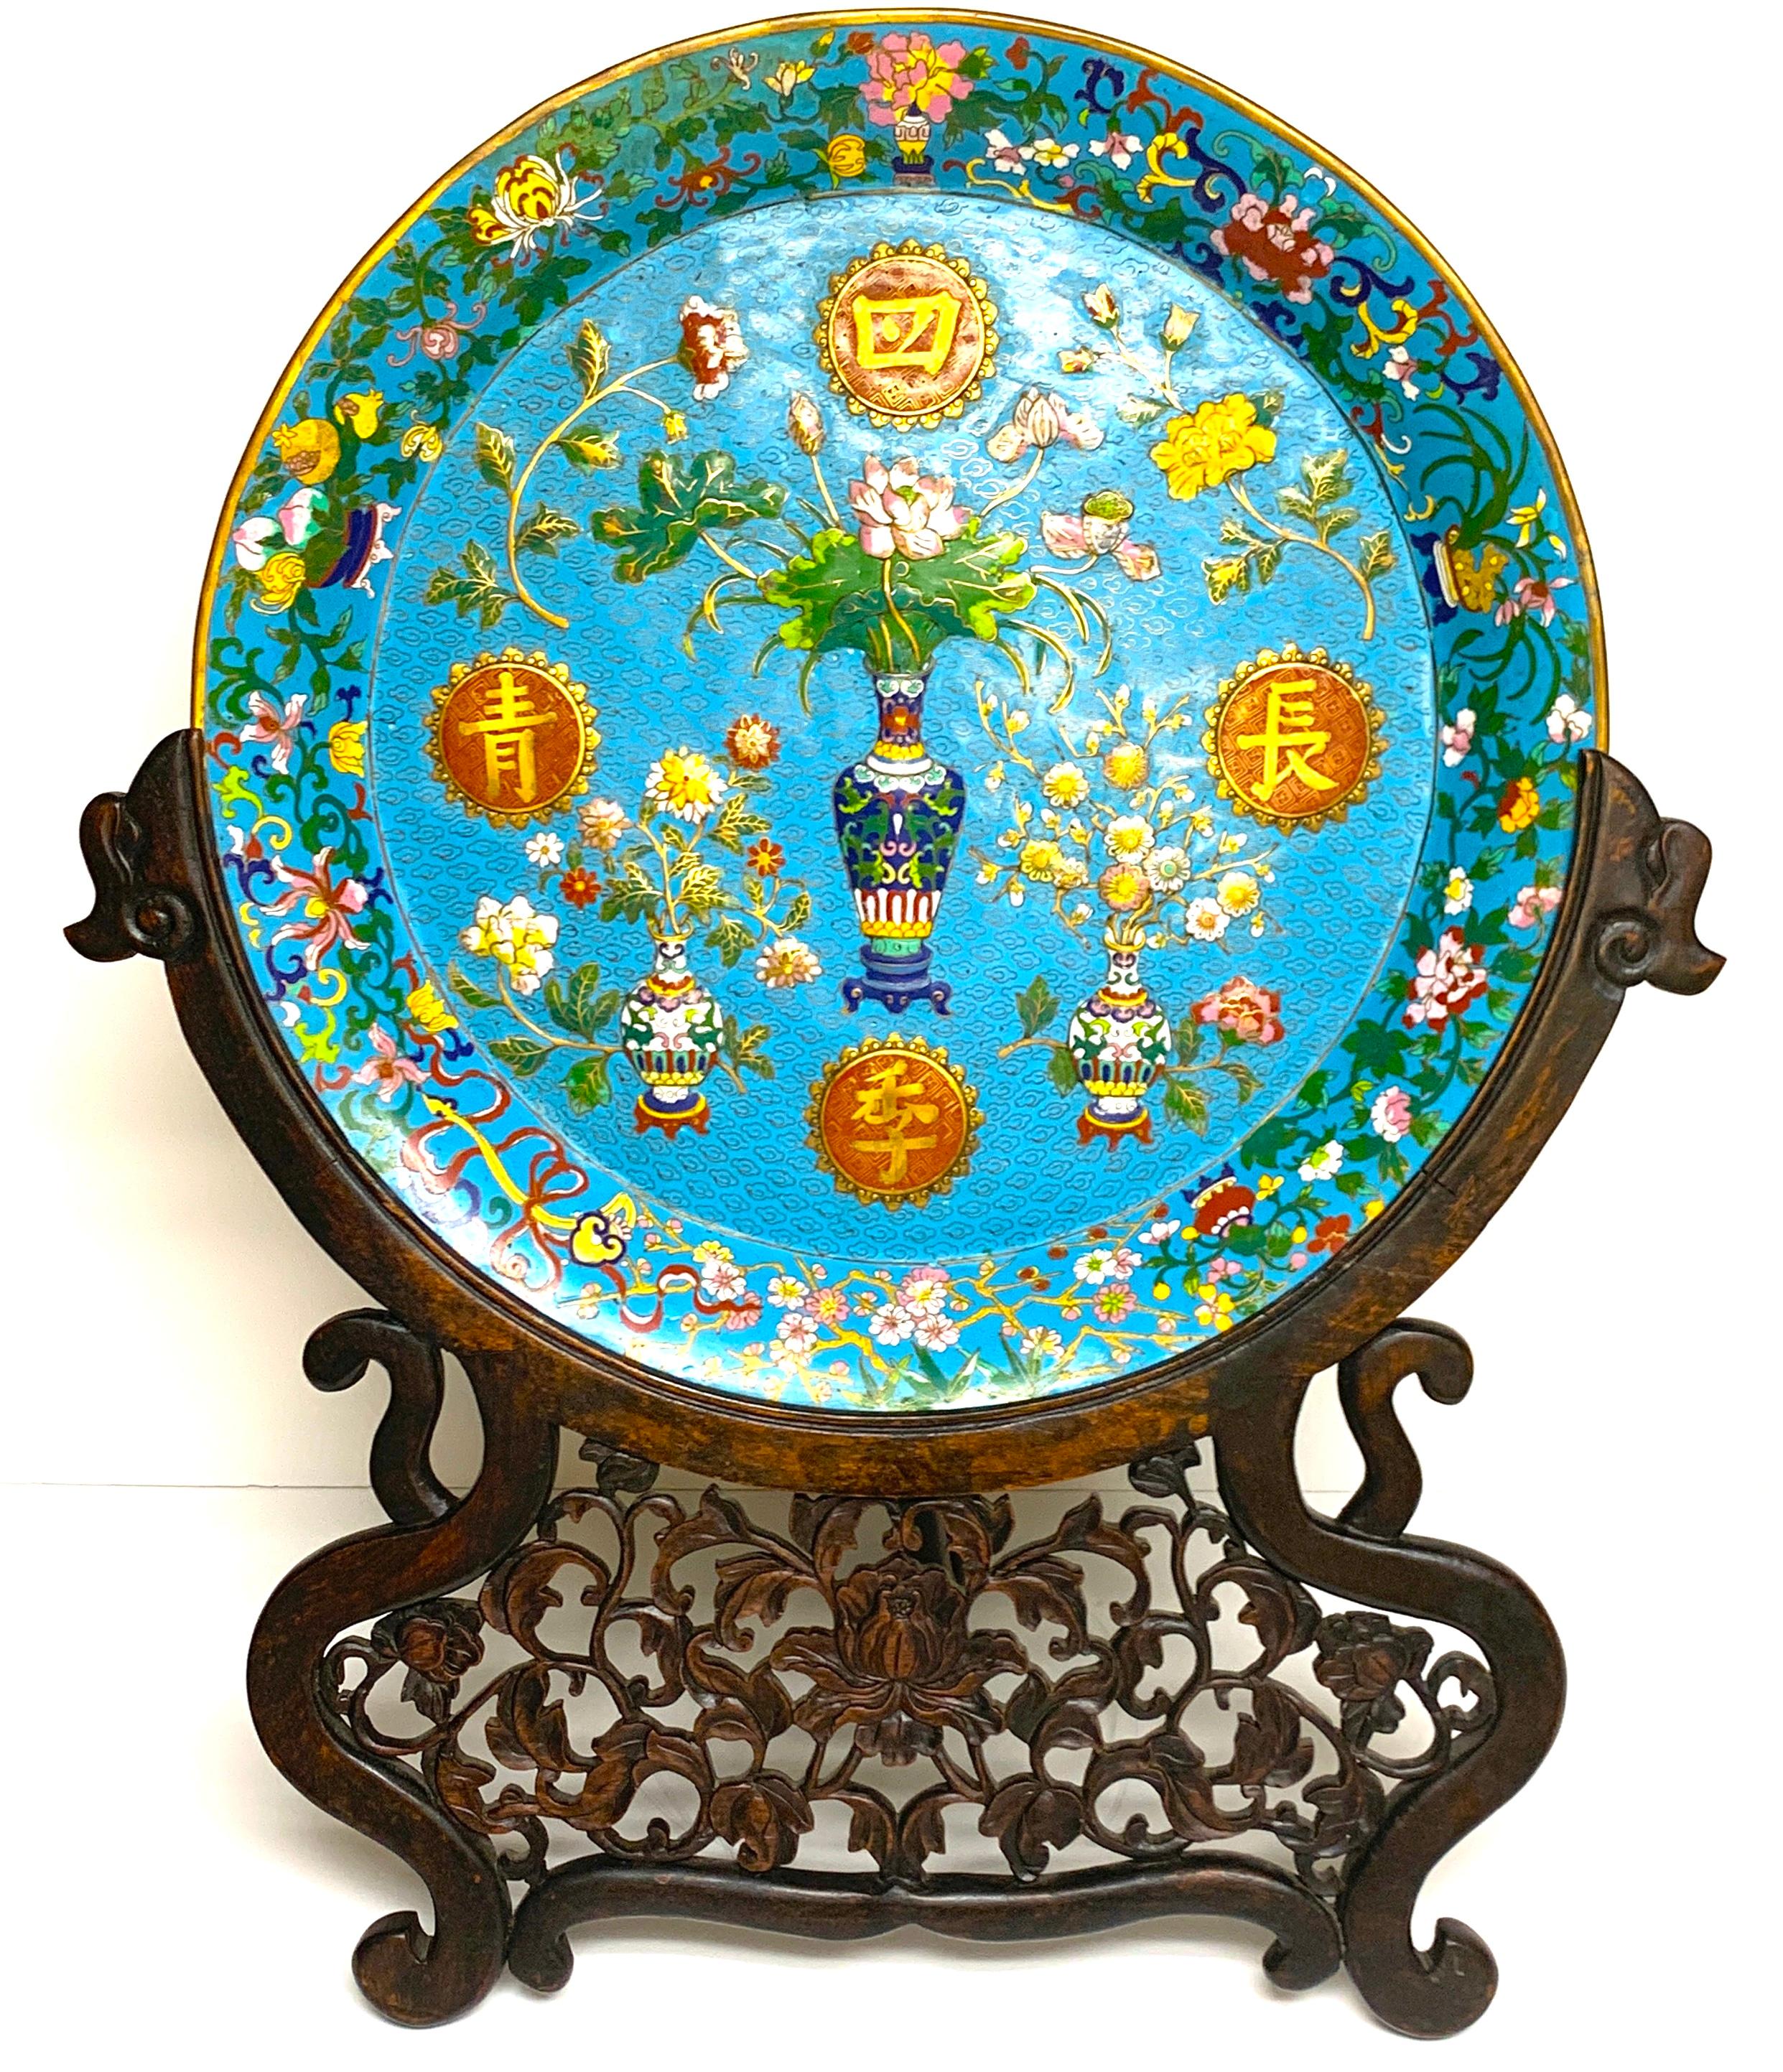 Exquisite Ming style Cloisonné charger and stand, profusely decorated front and back. The front with three dimensional (blown out/ raised) vases with flowers and four applied Chinese characters. The back vases and planters with Cherry blossoms and